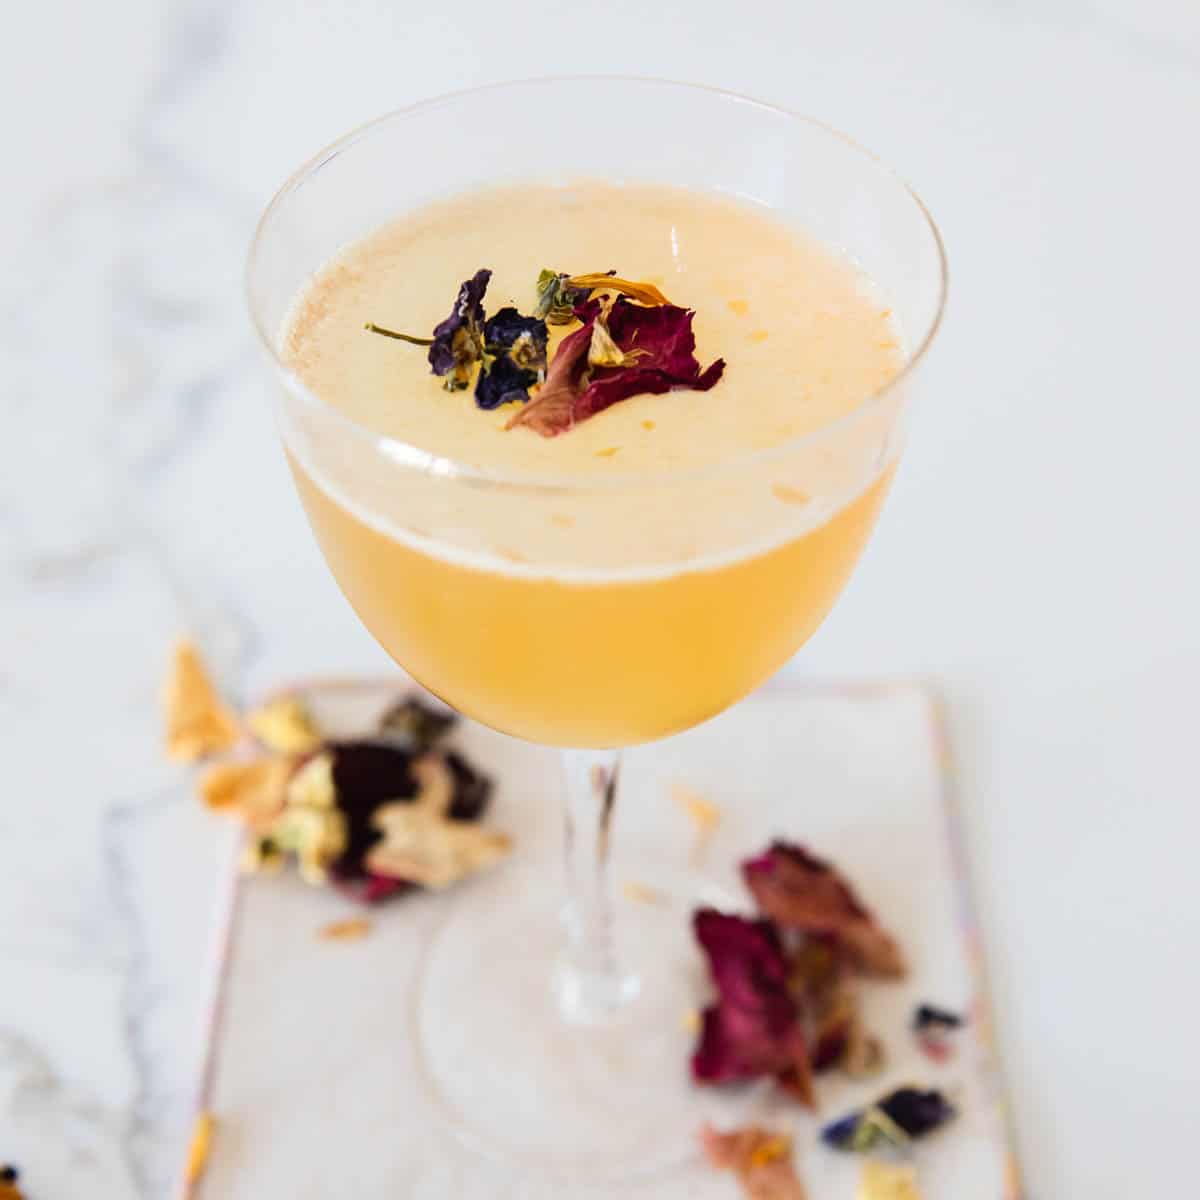 Close up of a sidecar garnished with edible dried flowers.